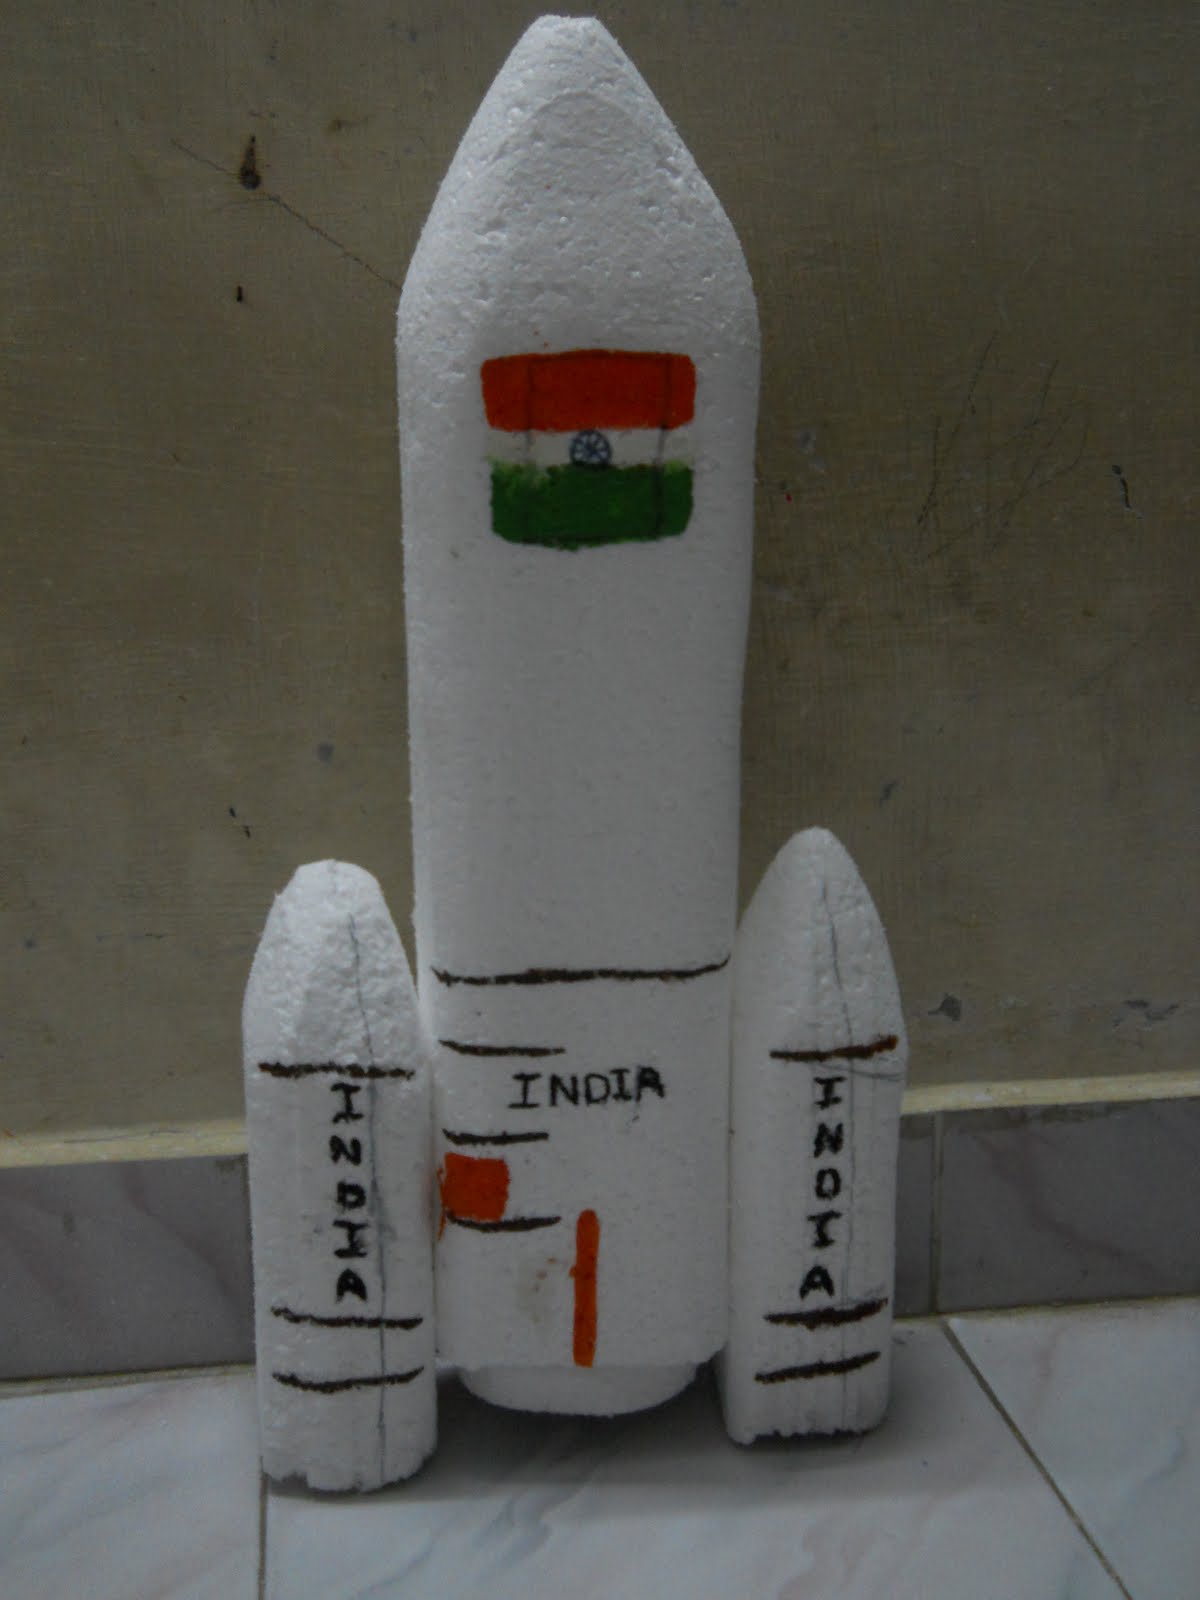 How To Make Rocket Model With Chart Paper